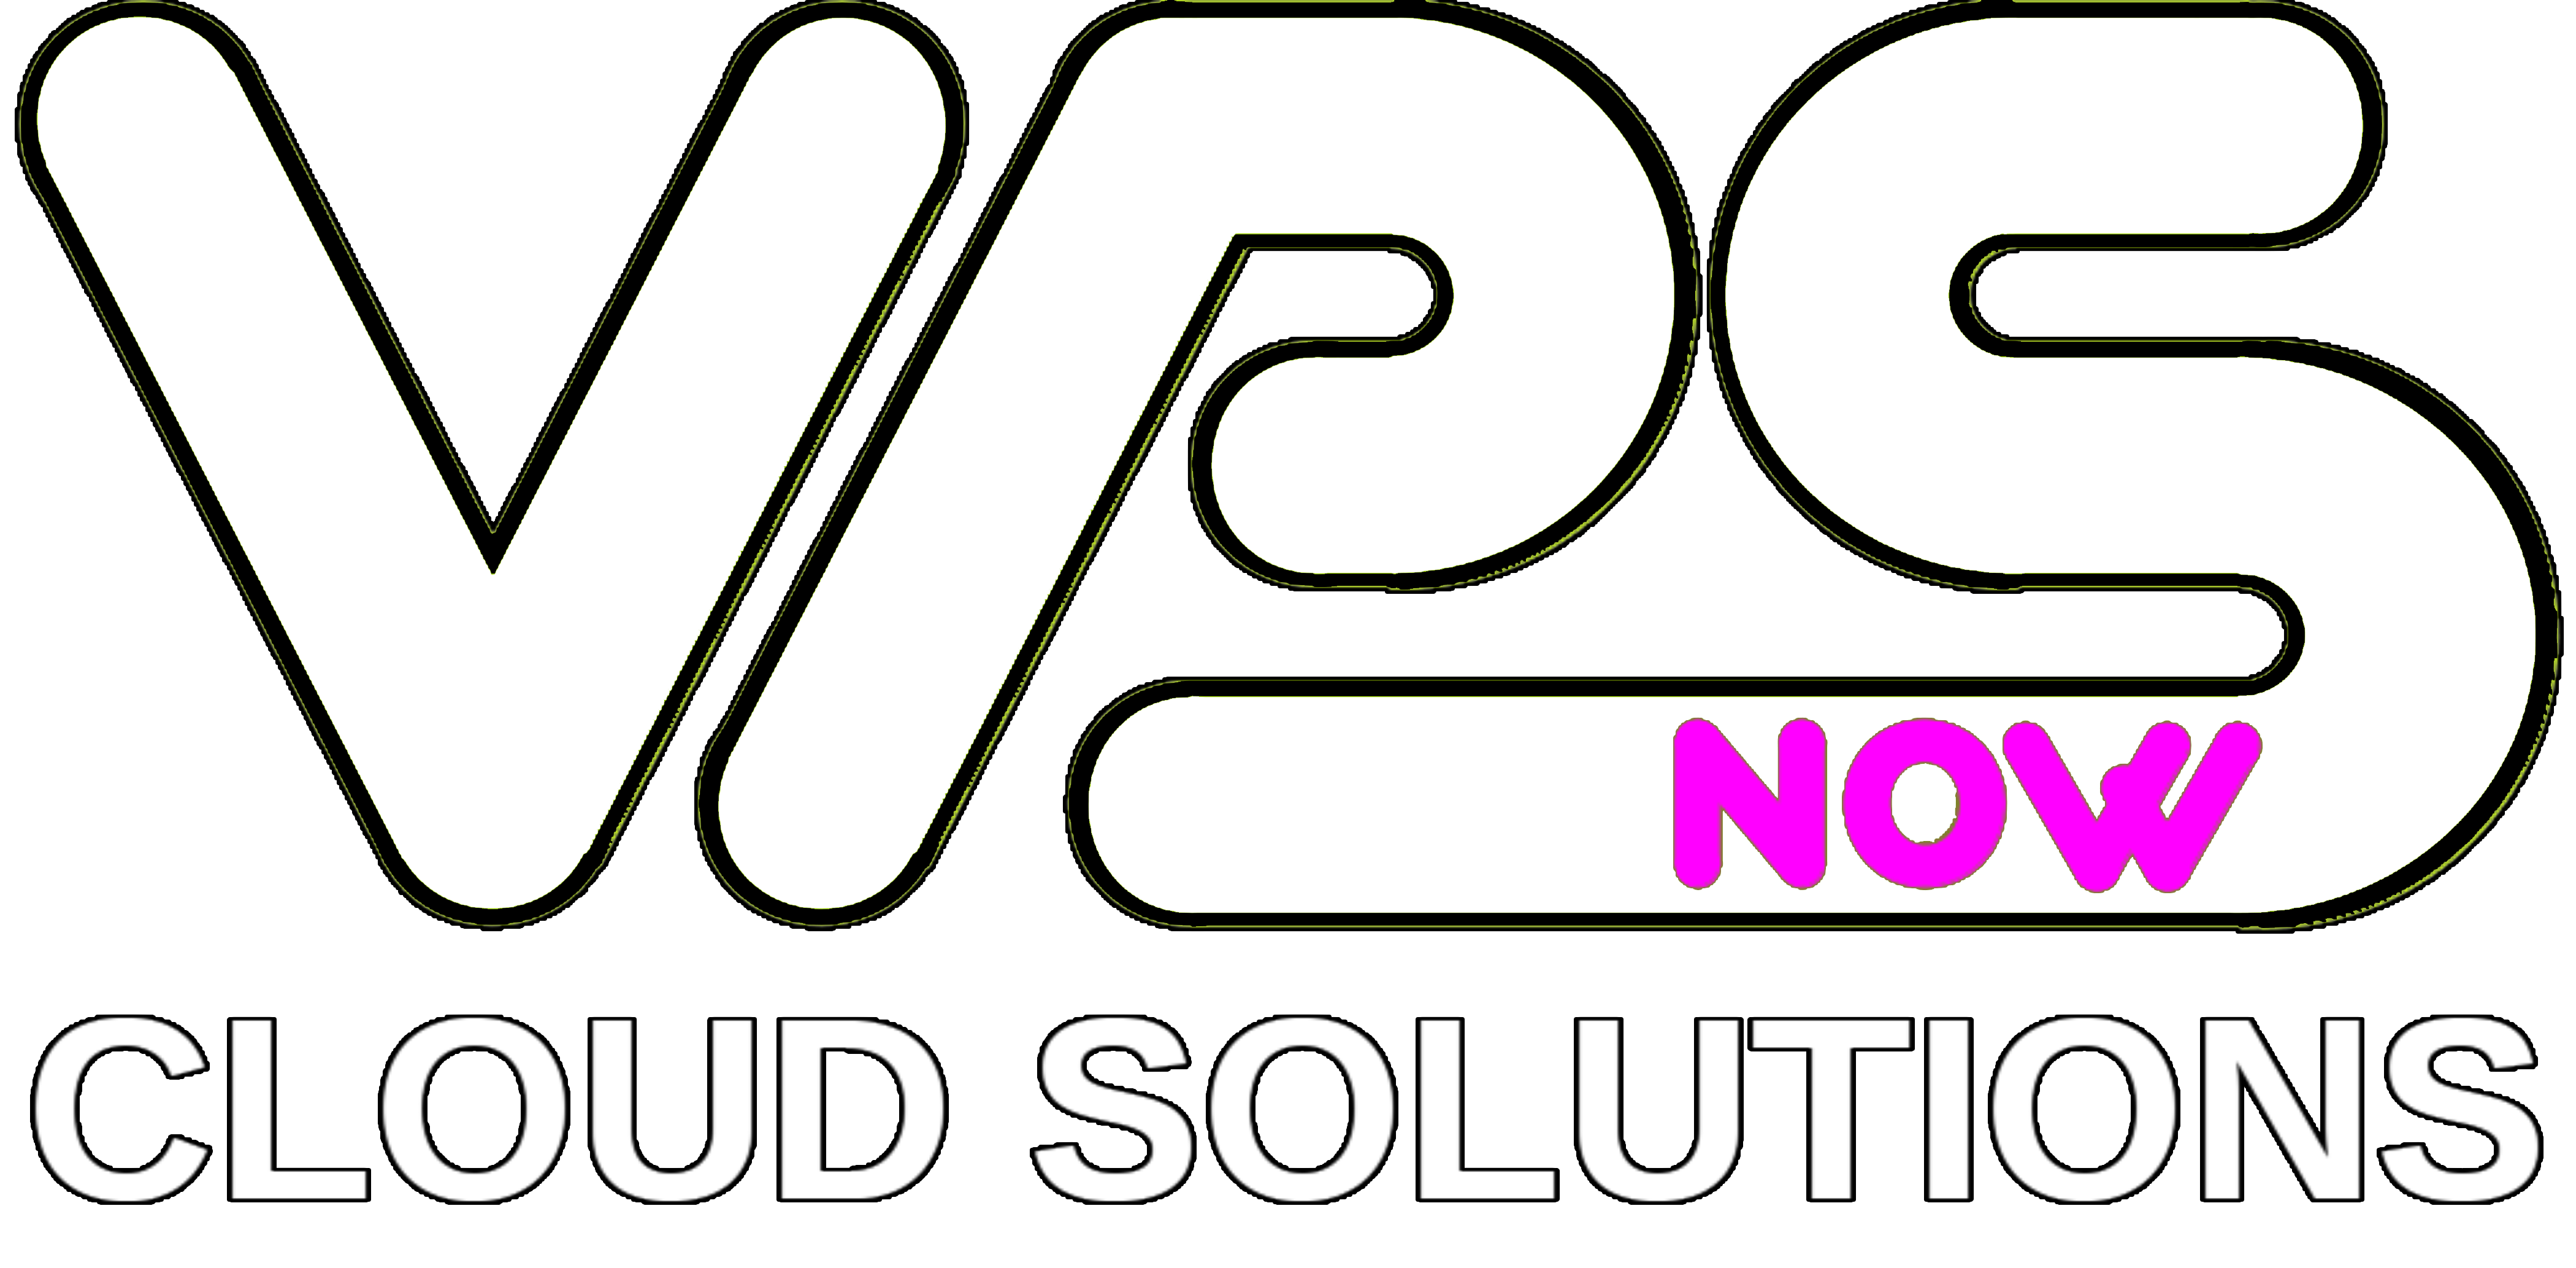 vps now cloud solution